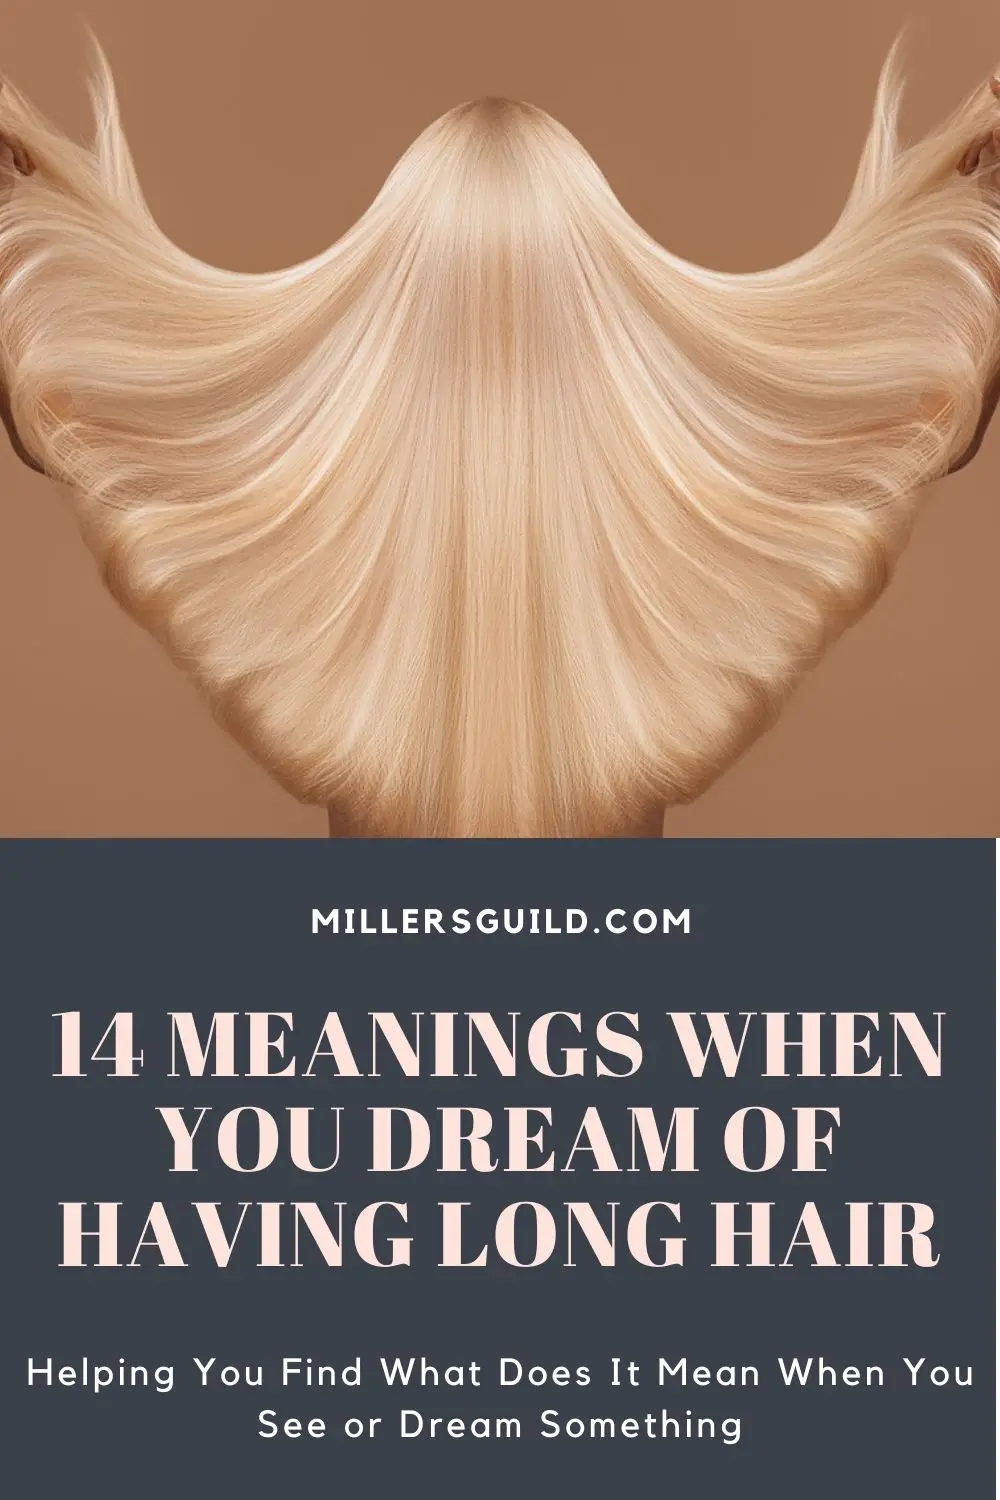 How To Interpret Dreaming Of Colouring Your Hair